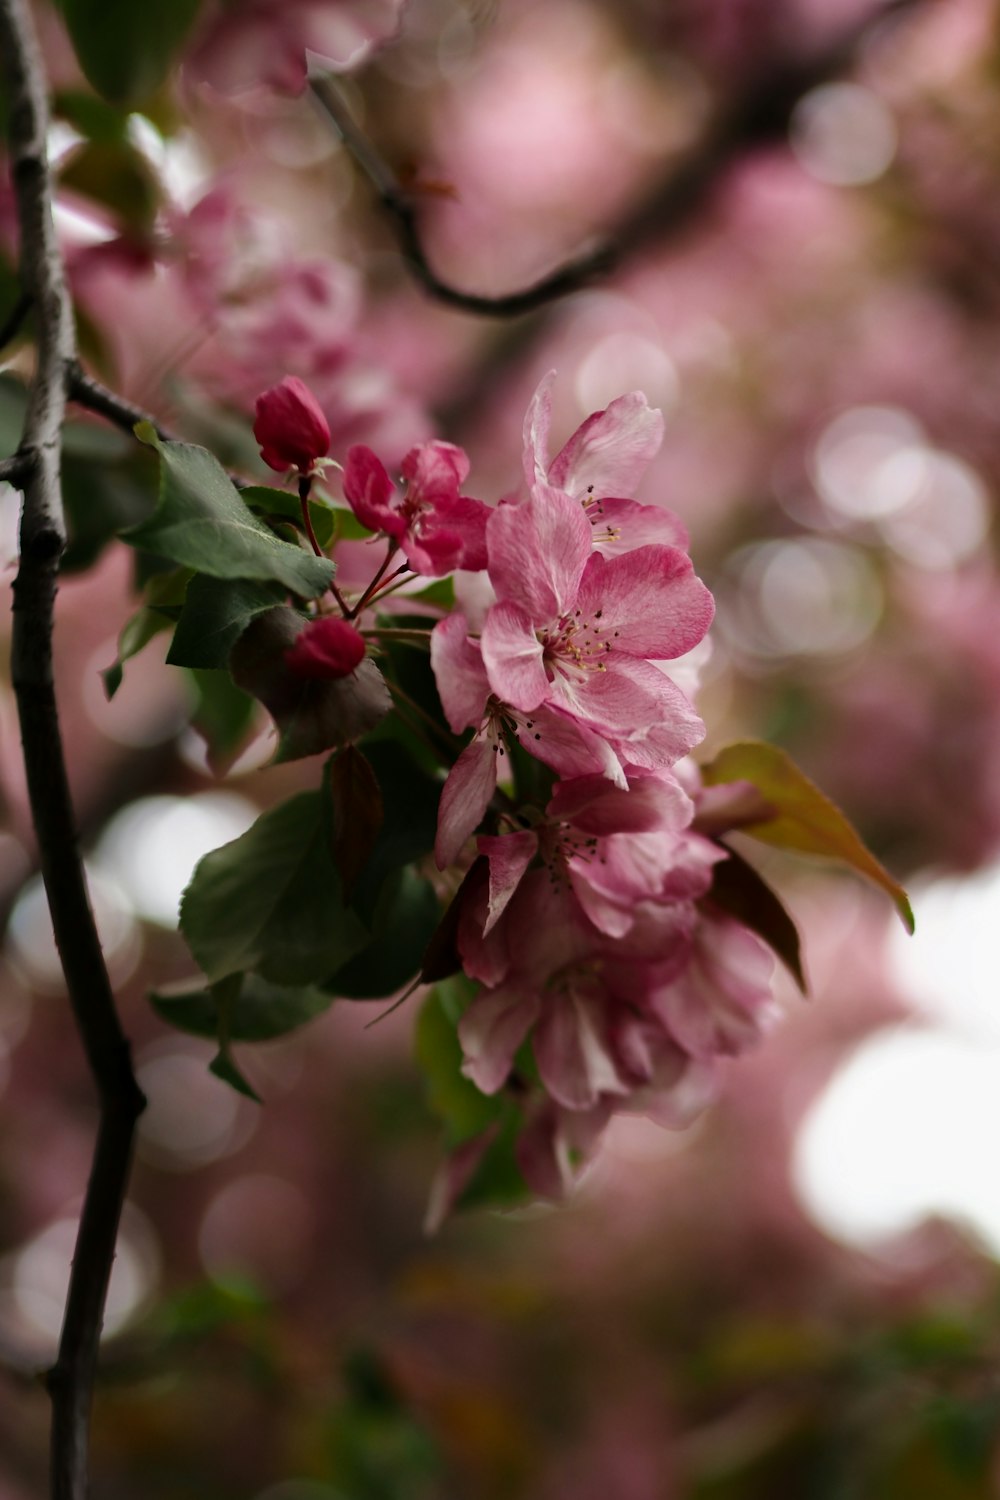 a branch with pink flowers and green leaves